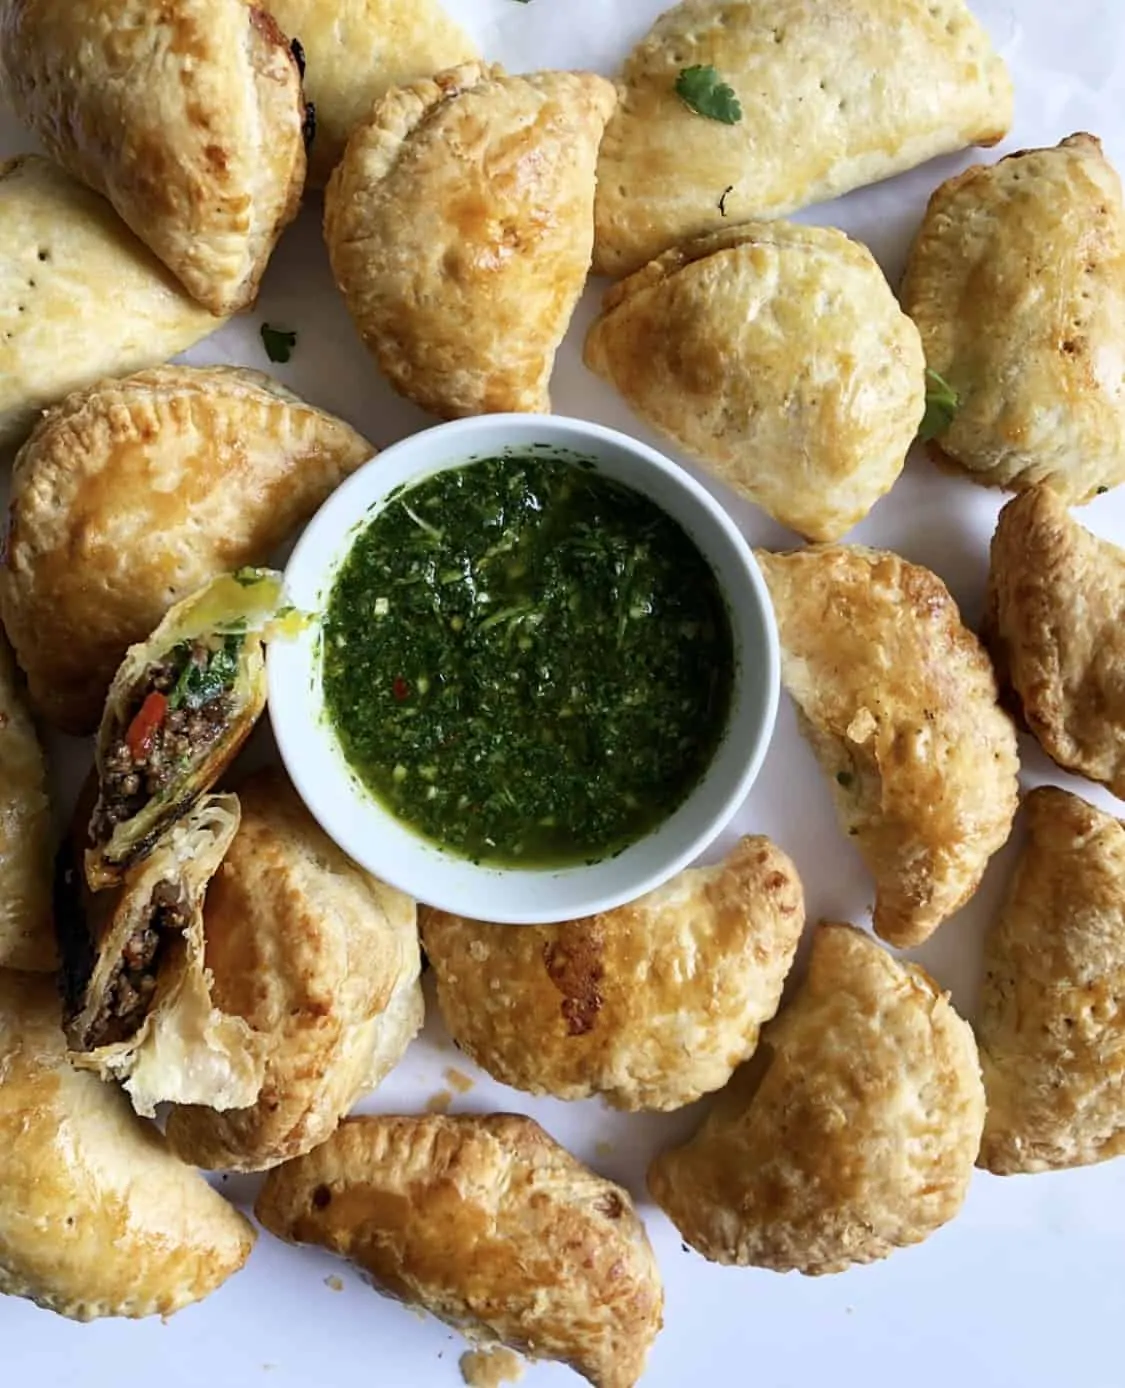 beef empanadas with chimichurri sauce in the center